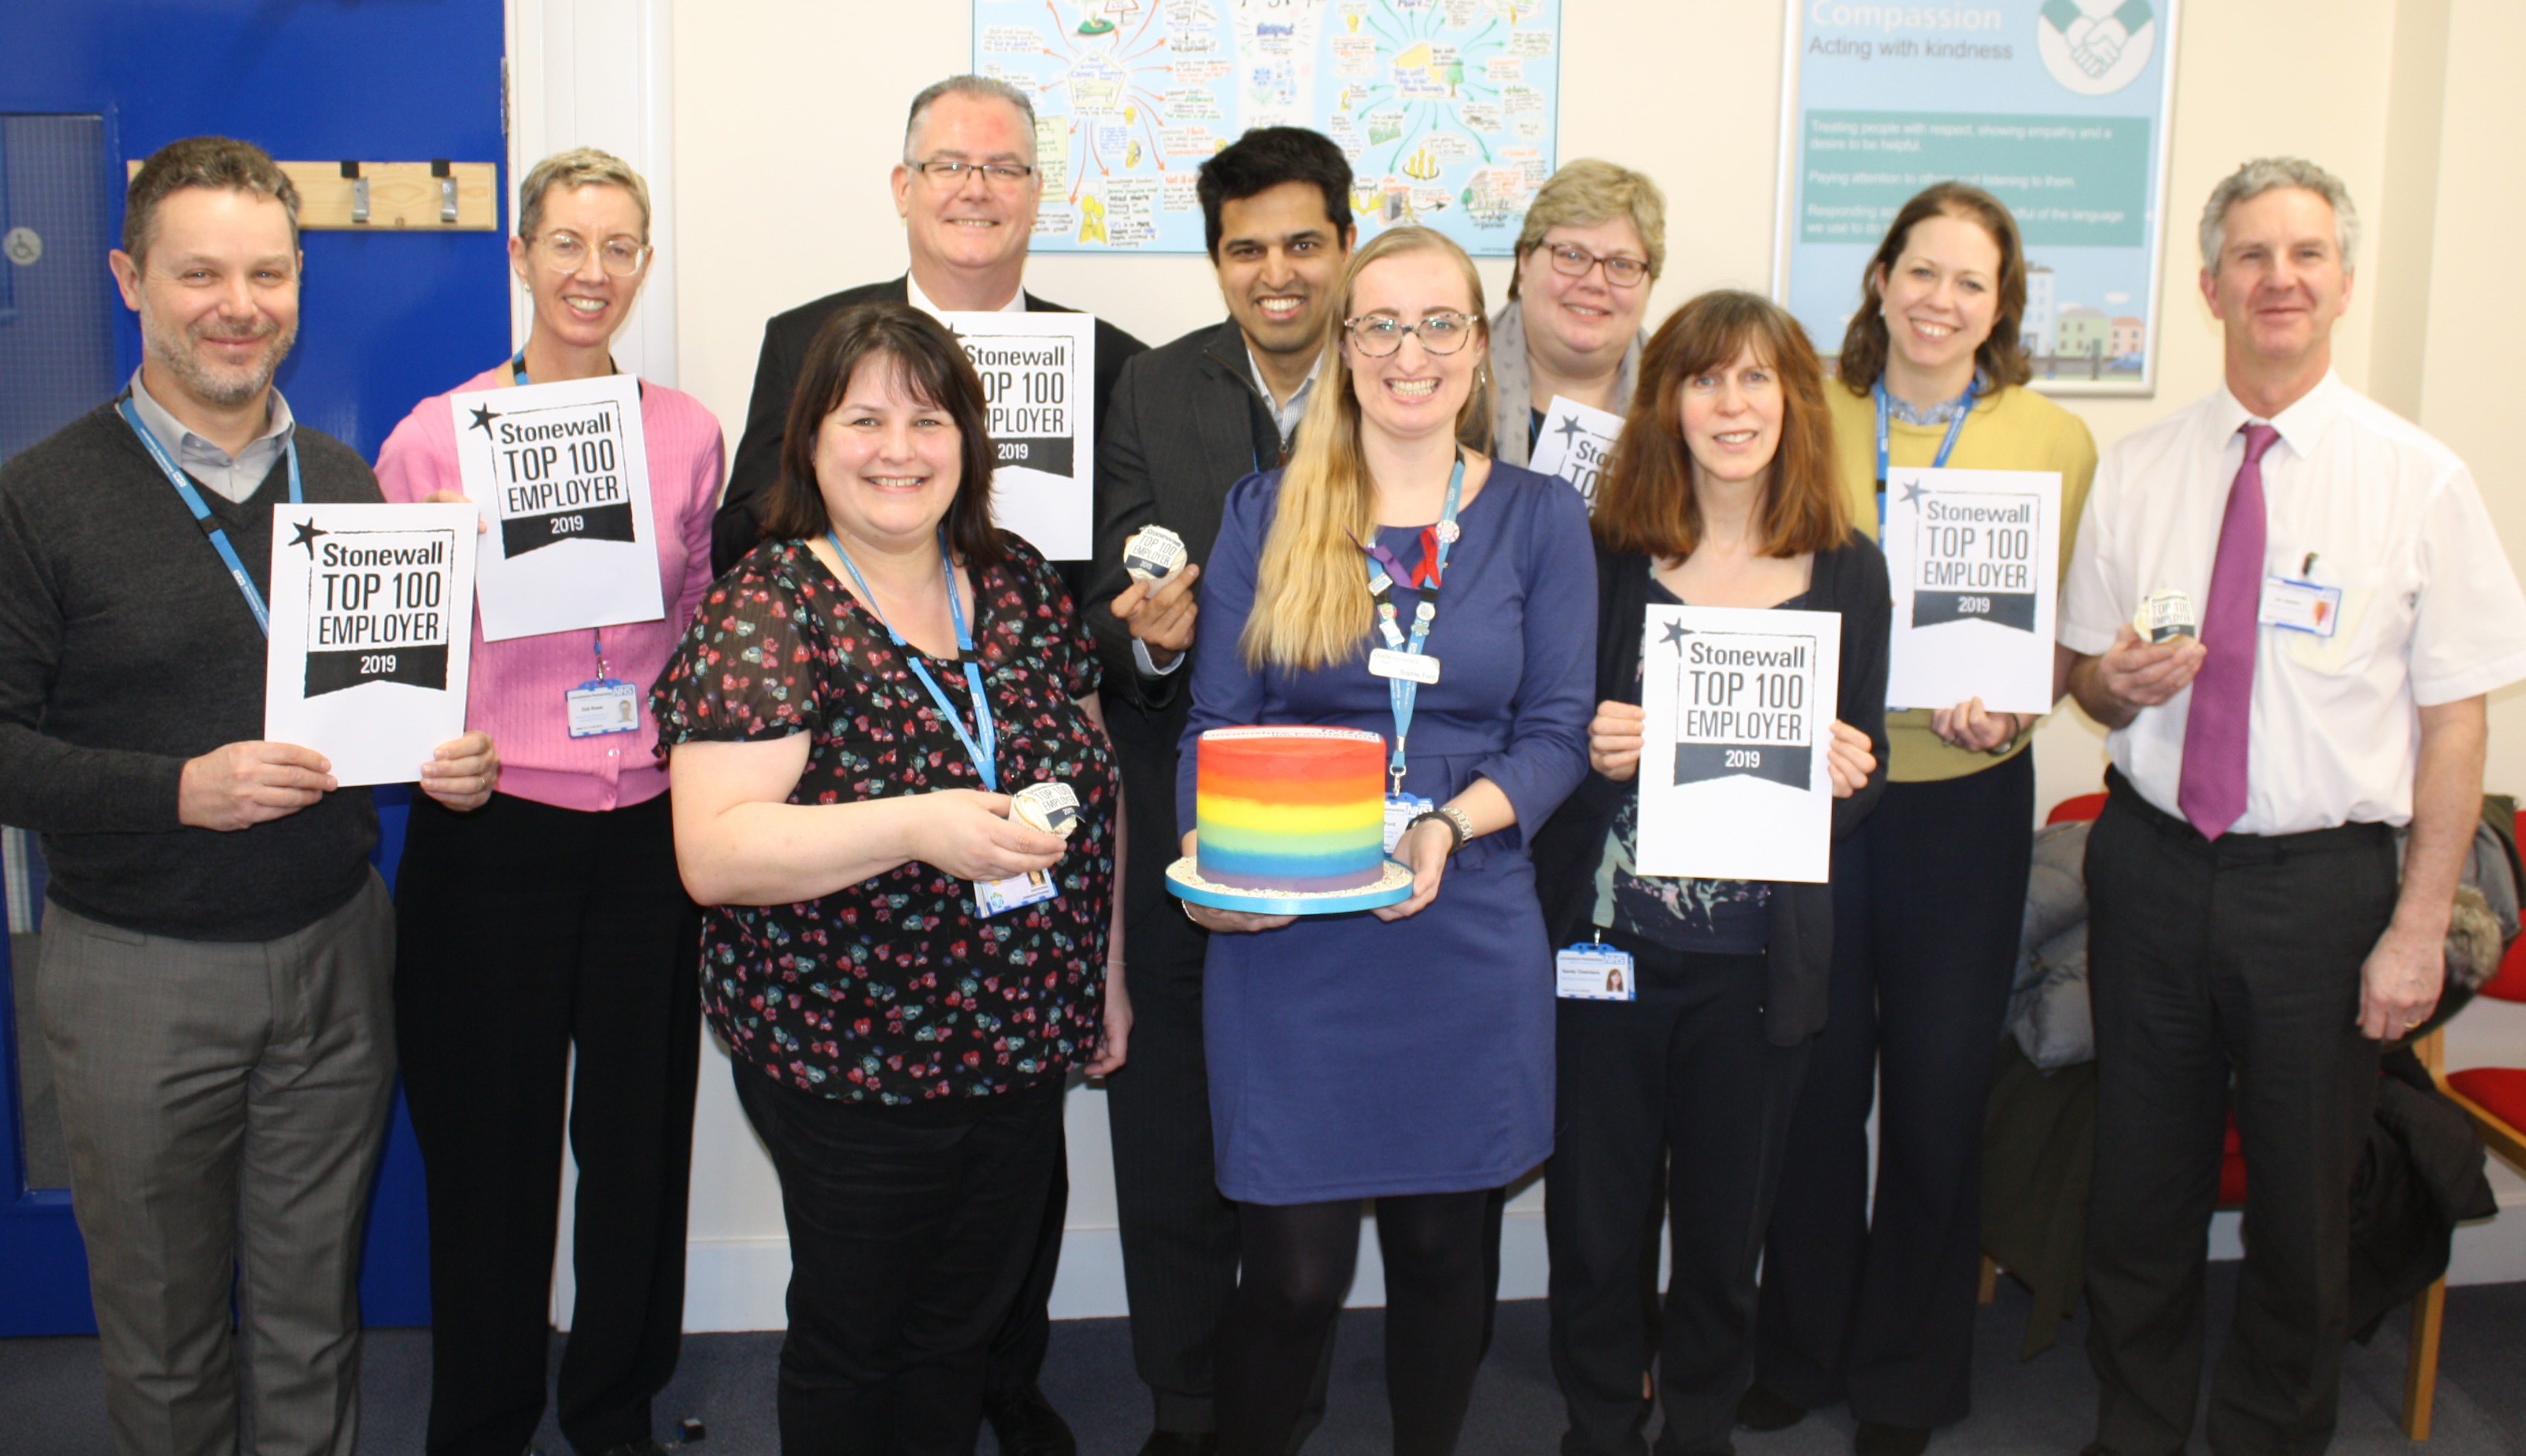 LPFT Staff and executive members celebrating achievement.
Photo: Lincolnshire Partnership NHS Foundation Trust